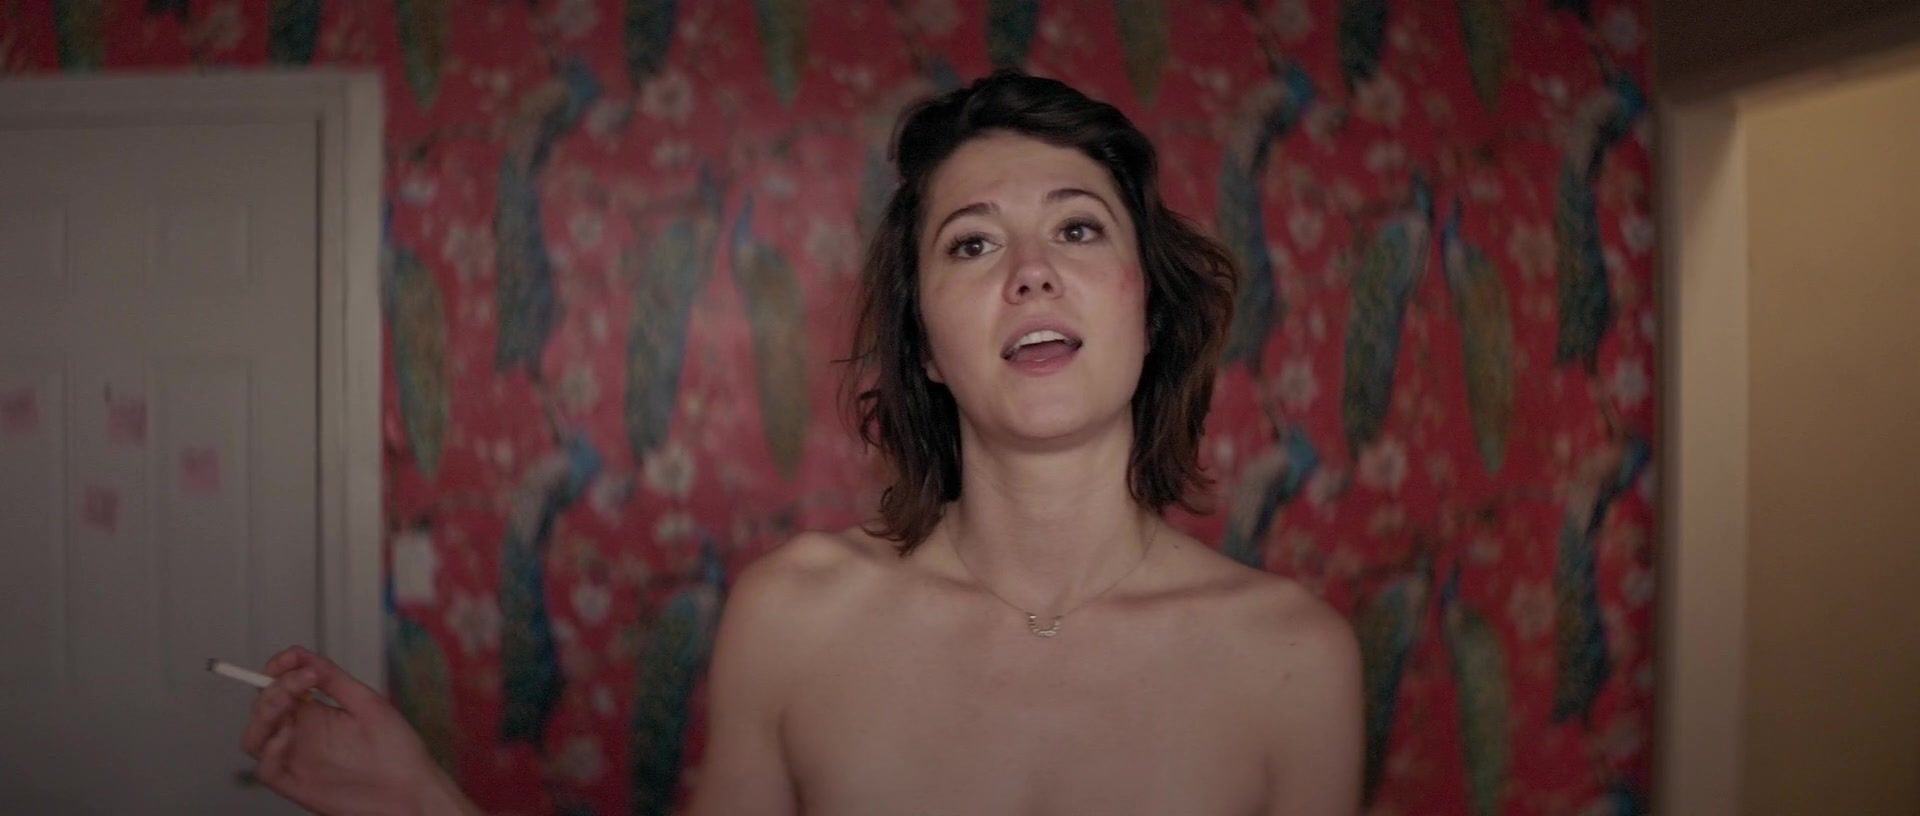 Music Mary Elizabeth Winstead nude - All About Nina (2018) ClipHunter